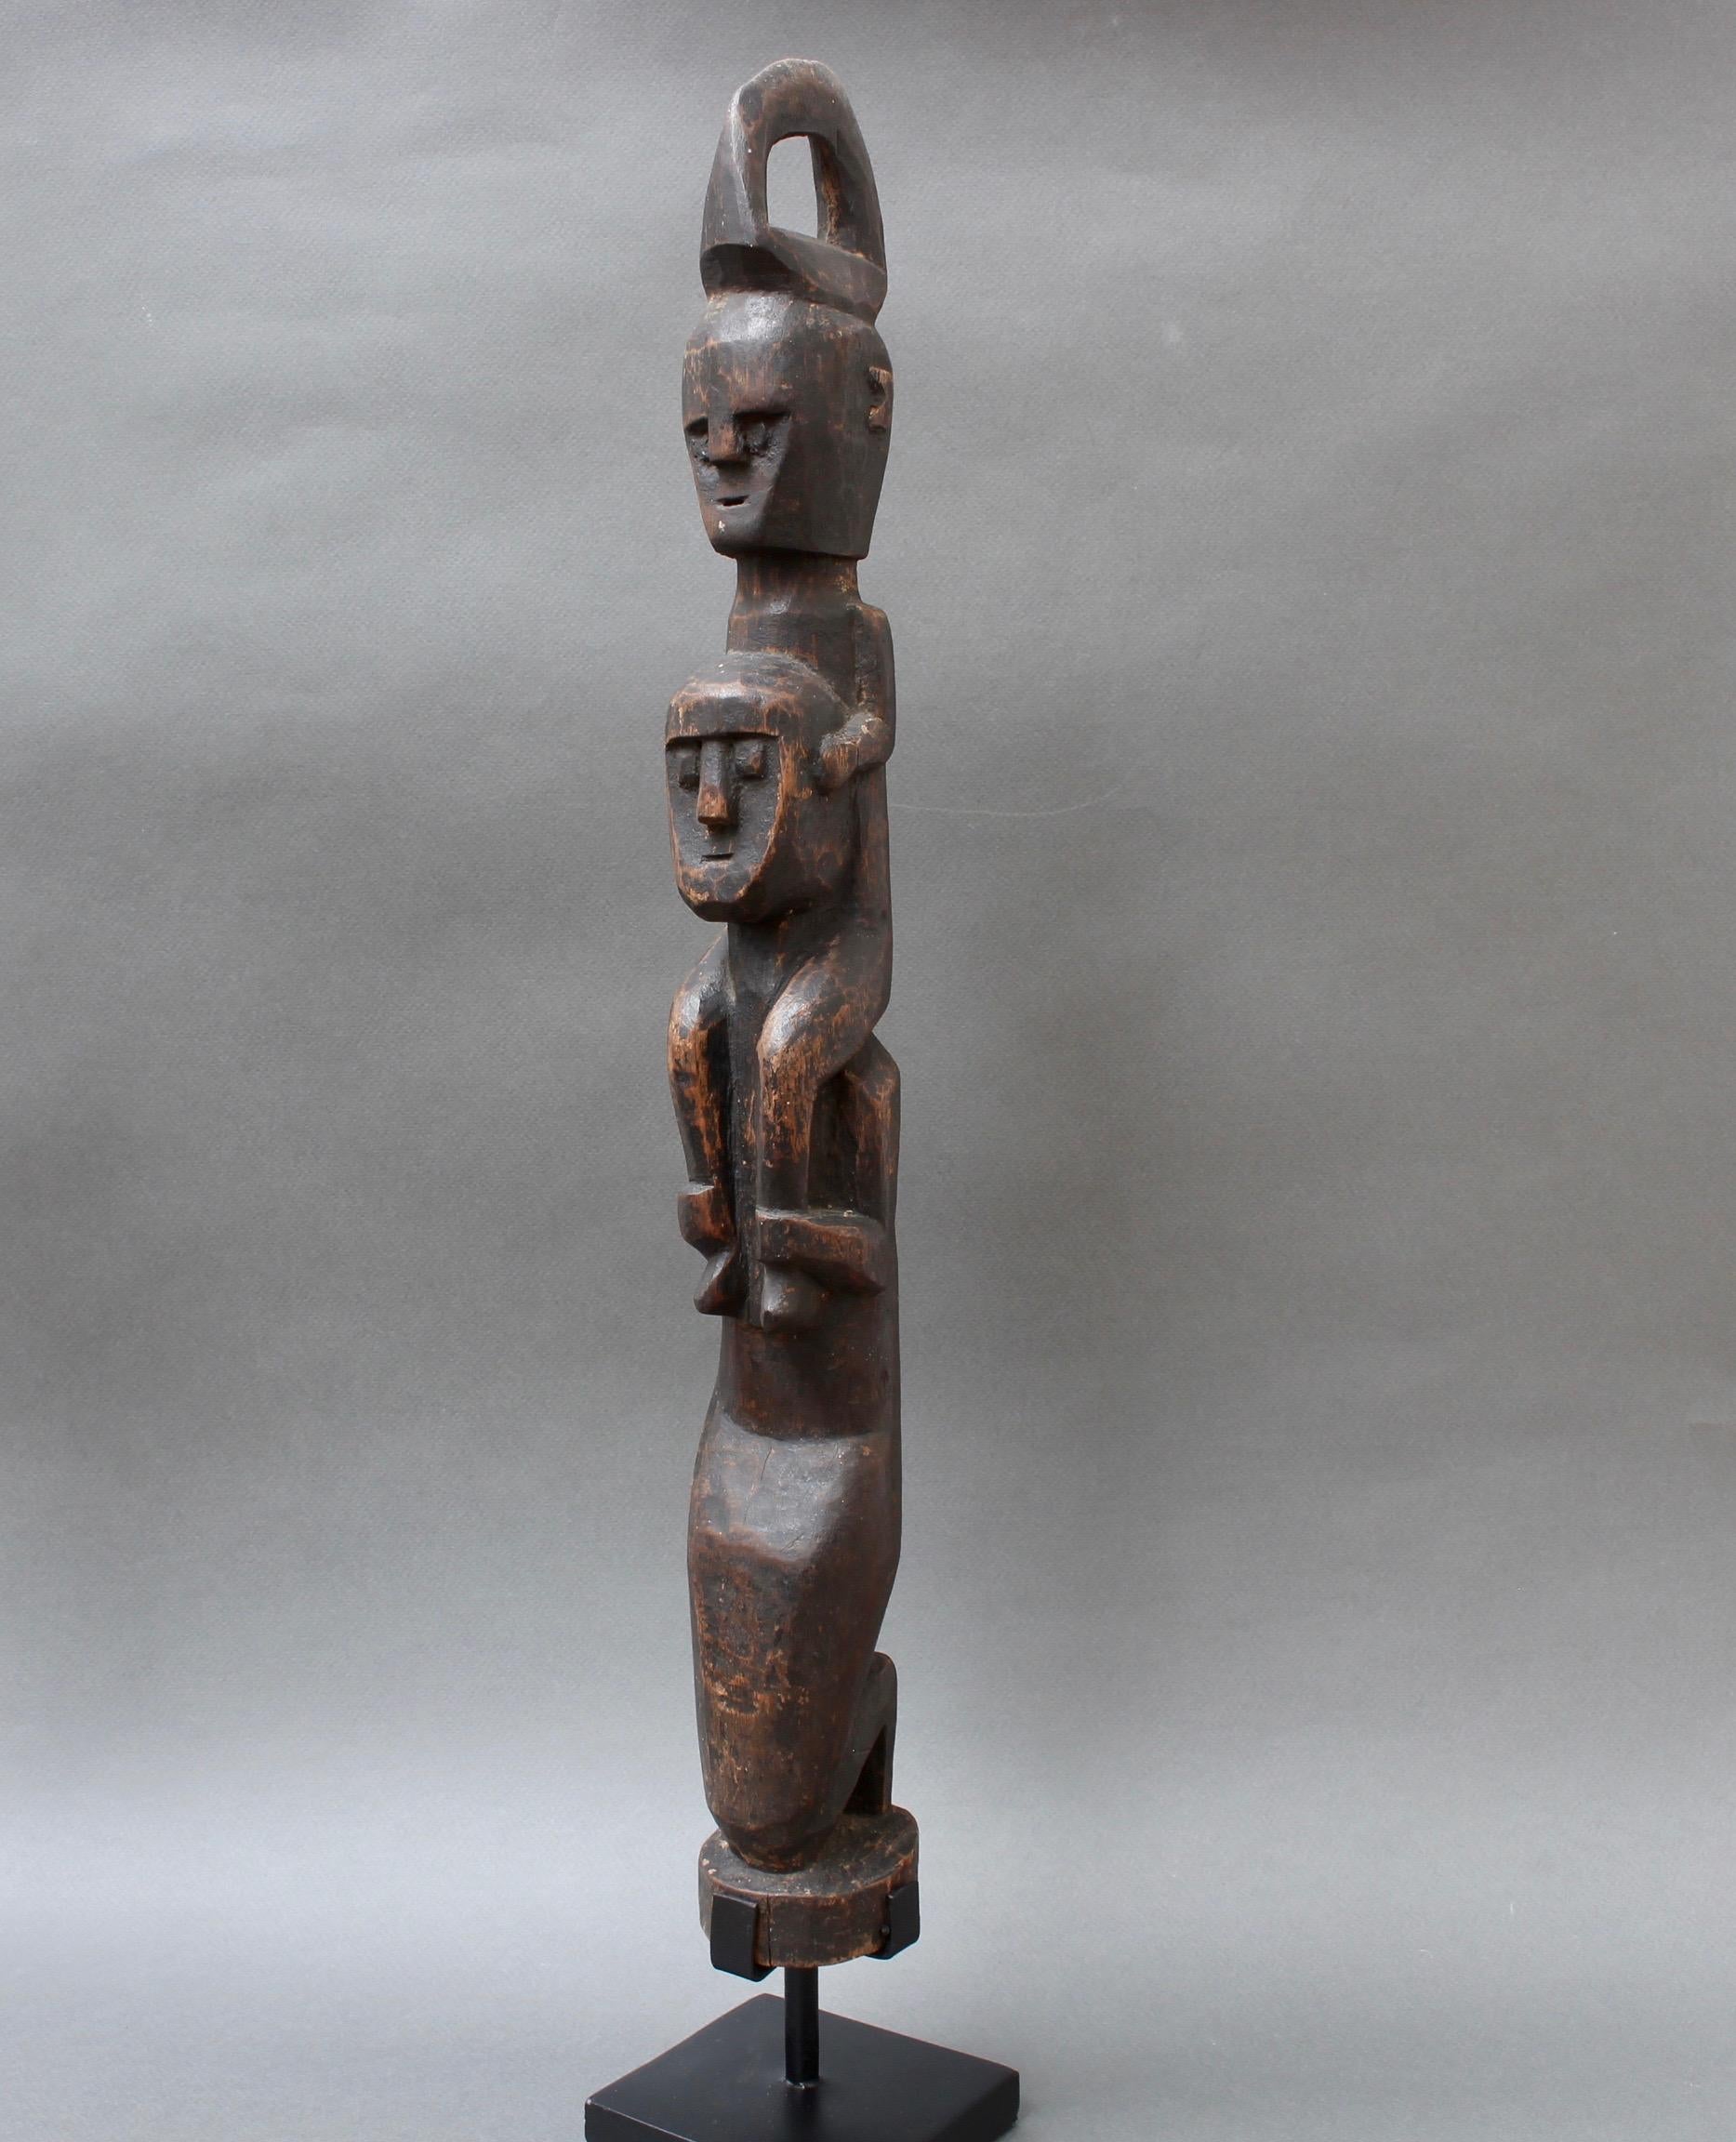 Wooden carving / sculpture of kneeling wooden figure with another on the shoulders from Timor, Indonesia (circa 1970s). The piece is in fair vintage condition commensurate with age and use and is situated on a contemporary stand. There is an aged,